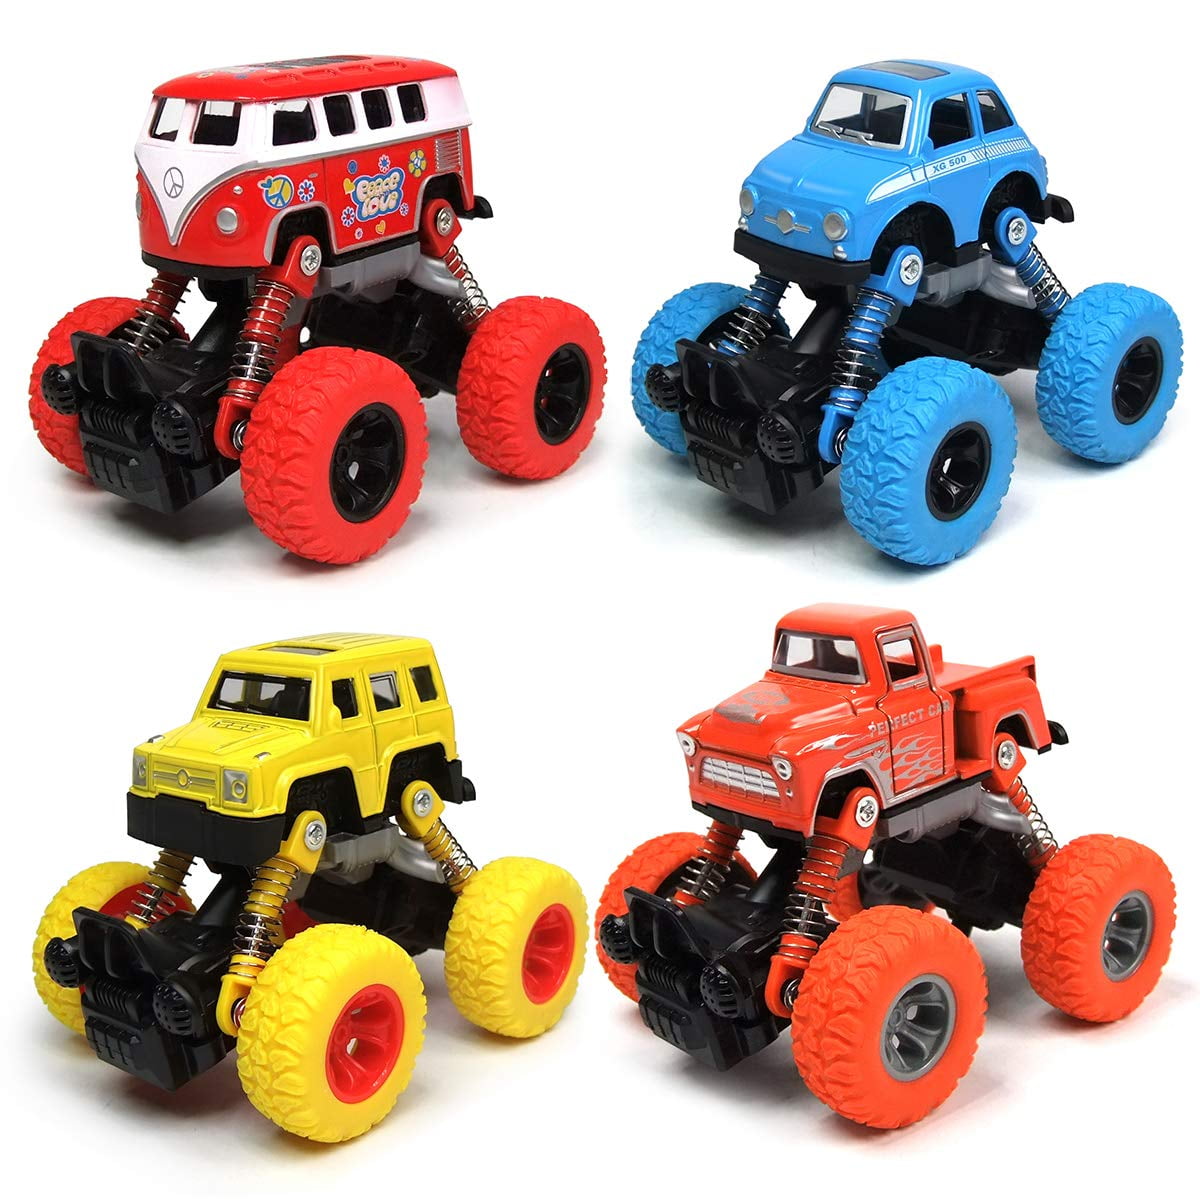 Assorted Vehicle Playsets for 1 2 Years Old 1 Truck + 2 Cars + 1 Helicopter Rlimate Wooden Toddler Toys for Boys and Girls